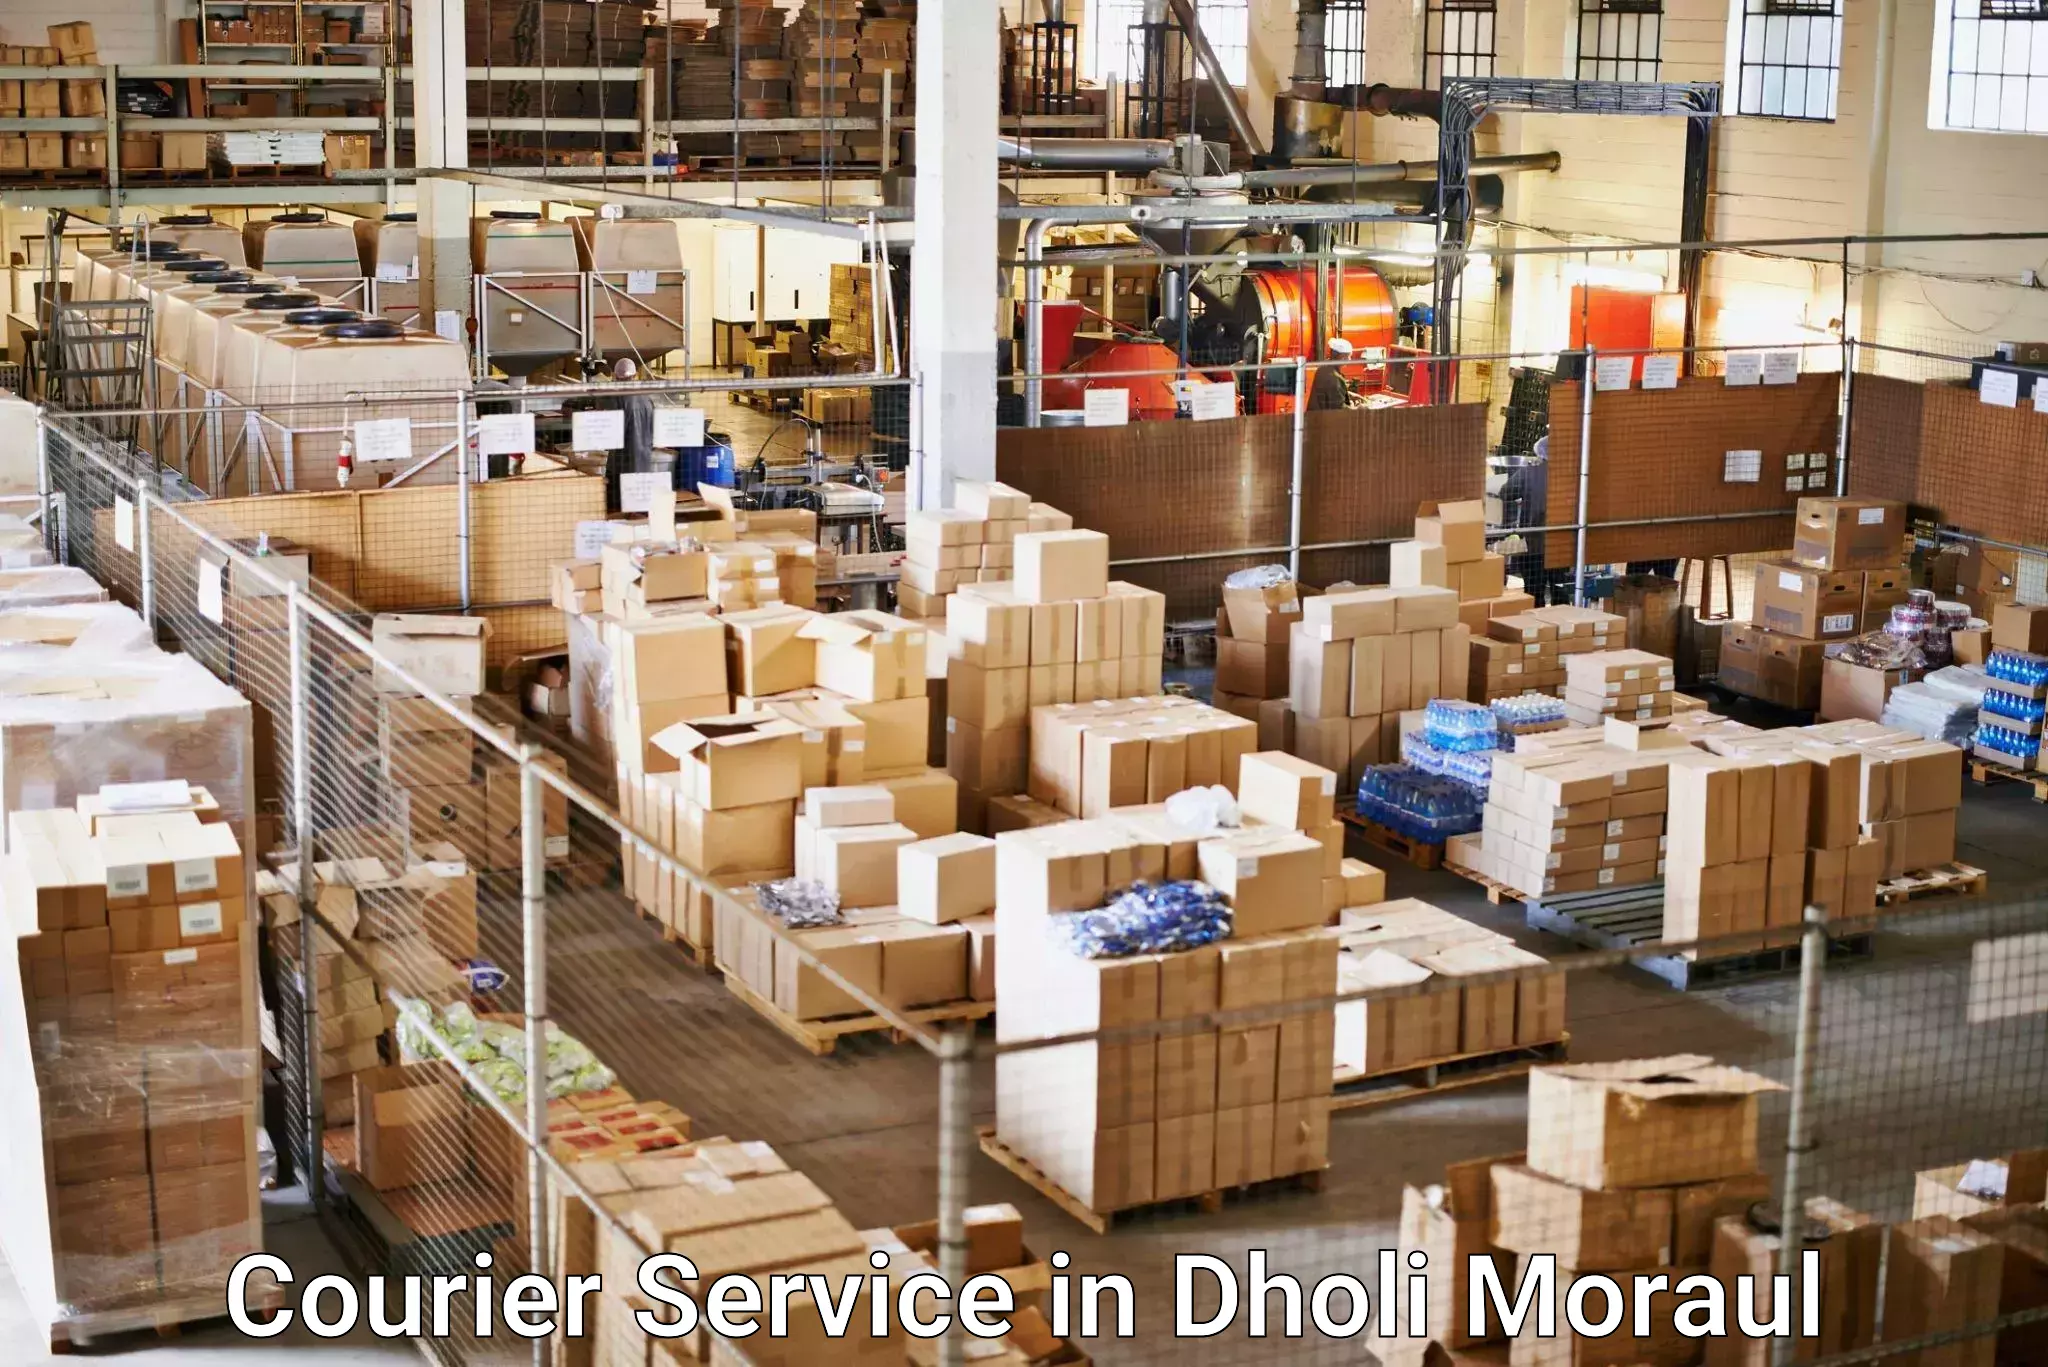 Reliable freight solutions in Dholi Moraul